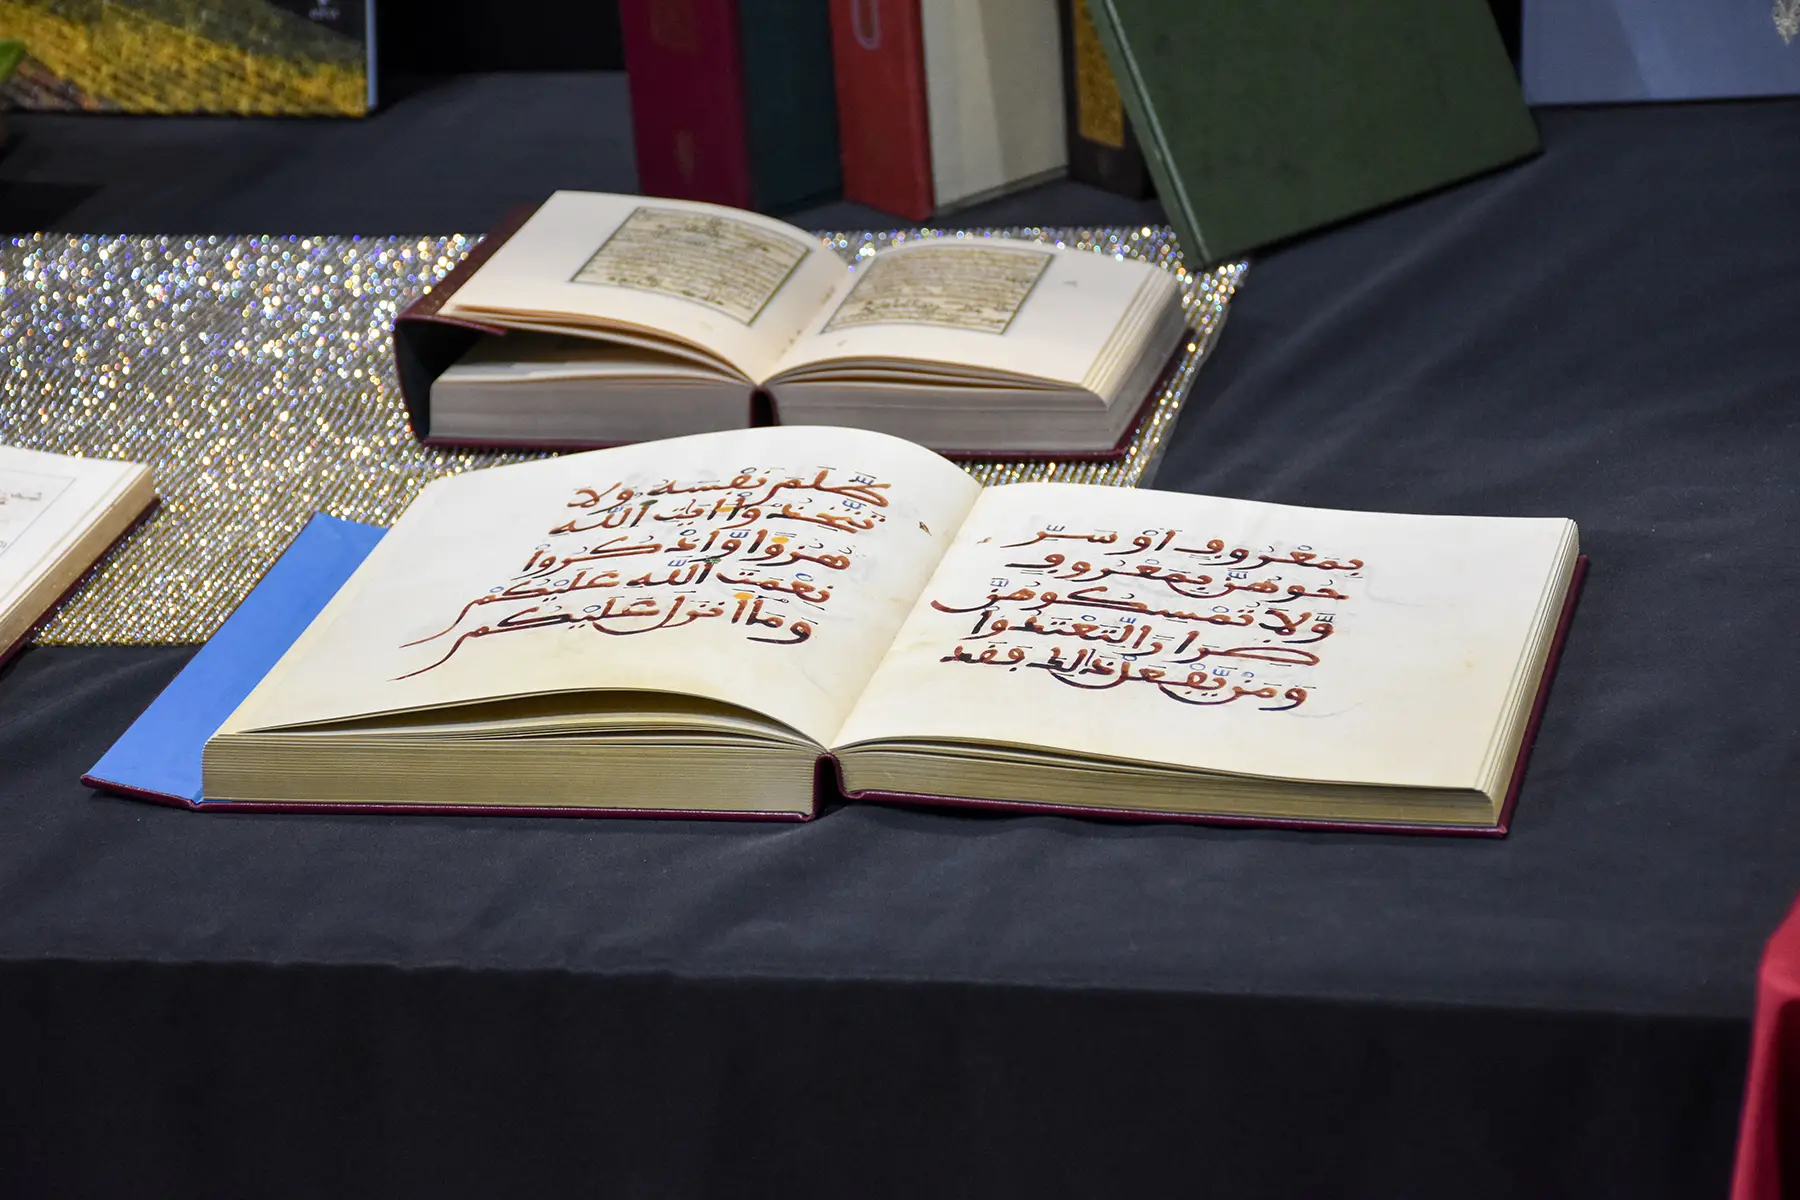 Old Arabic books open on a table